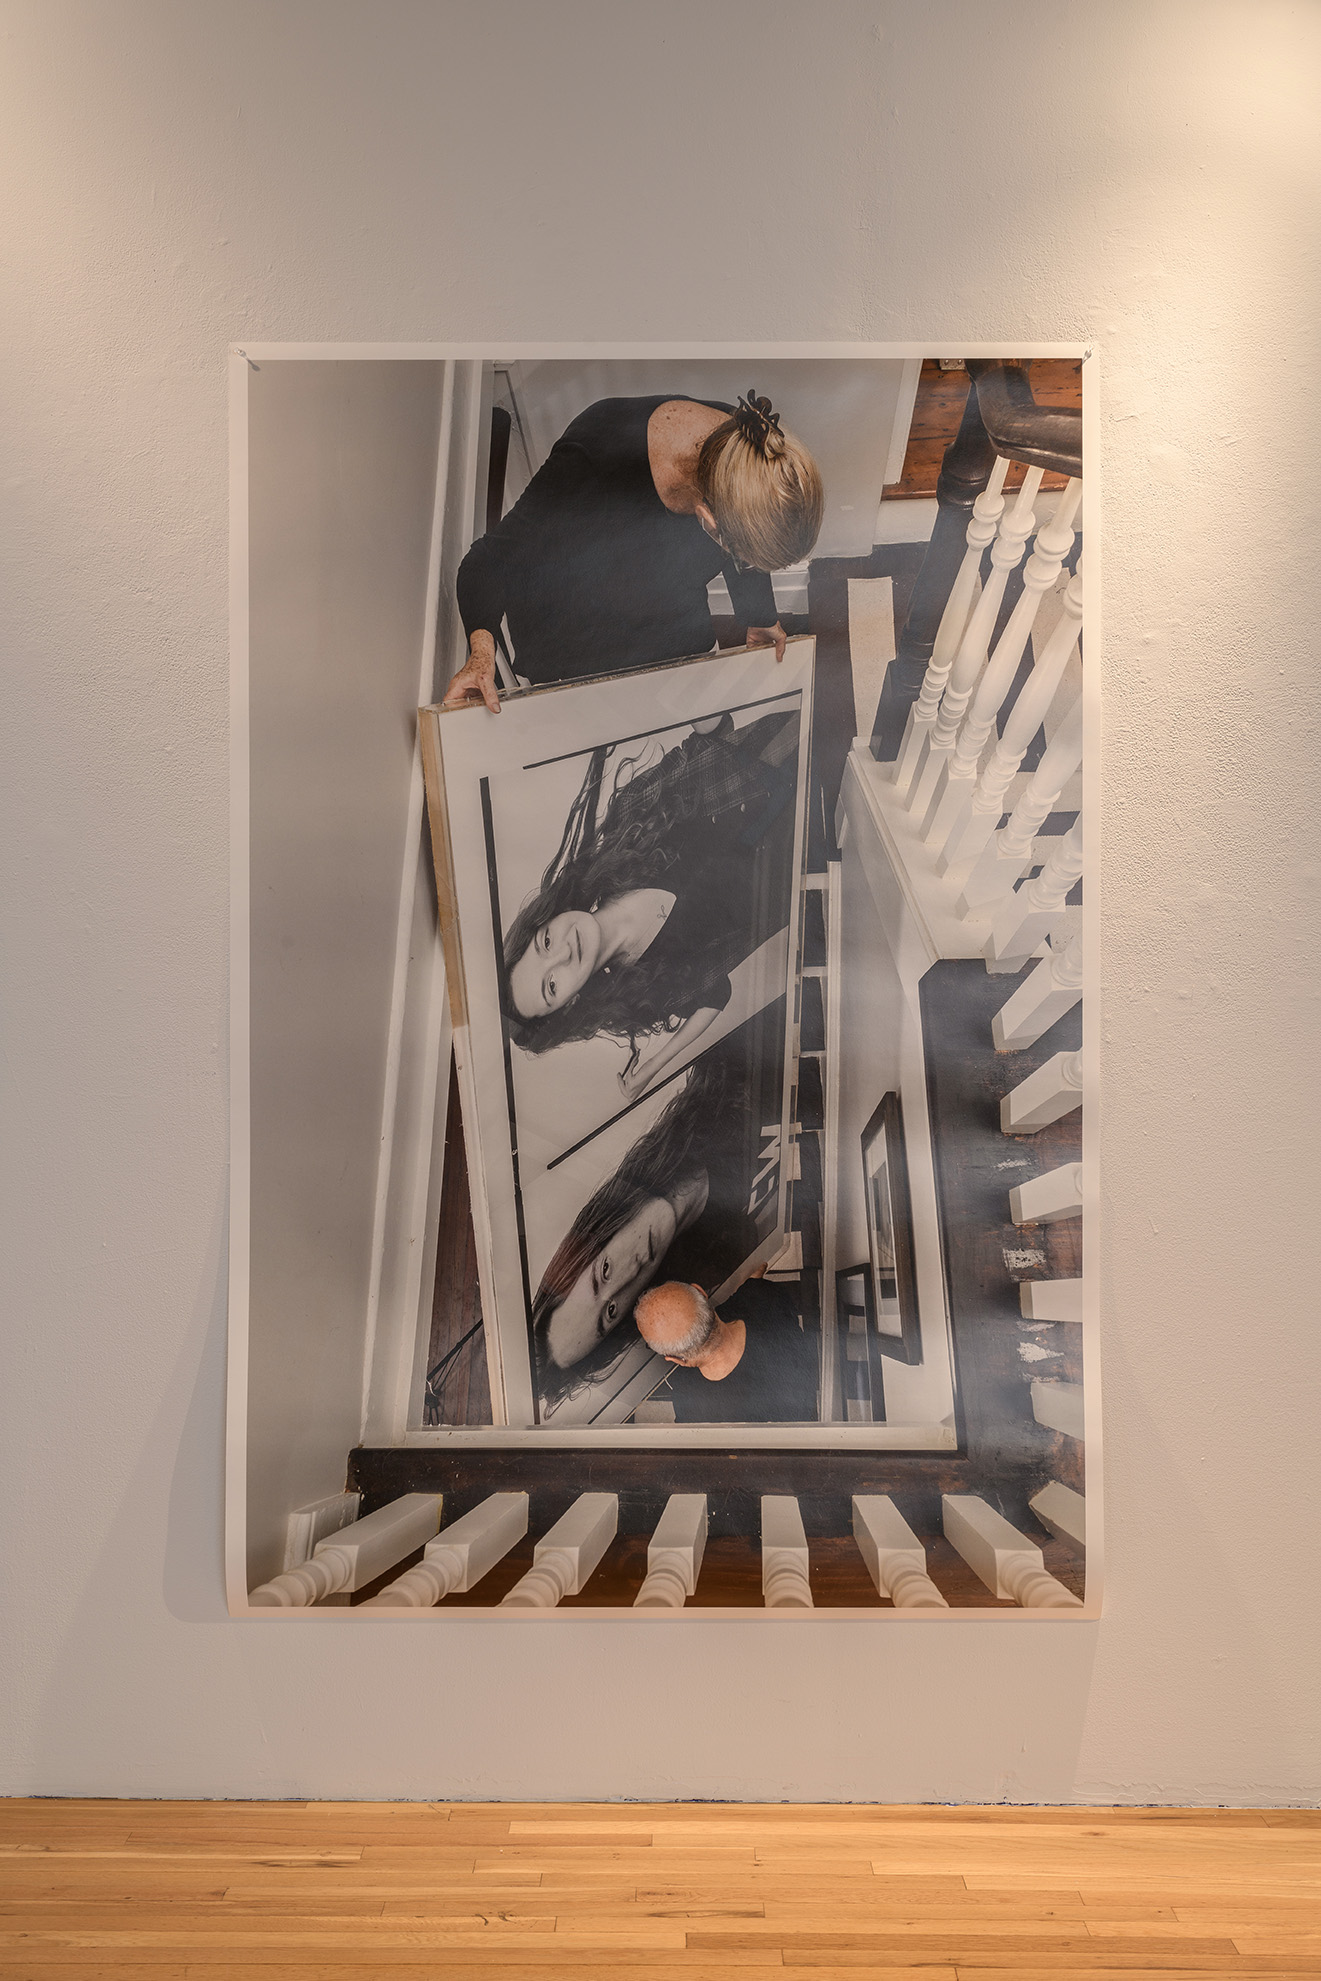 [An unframed color photograph depicting two people carrying a large artwork down a steep, narrow staircase. The artwork being carried is a large framed photograph of two studio portraits. All of the figures depicted, both the people carrying the photograph and the portraits of the people photographed appear to be white and the two people carrying the framed photograph appear to be much older than the two people in the portrait.]